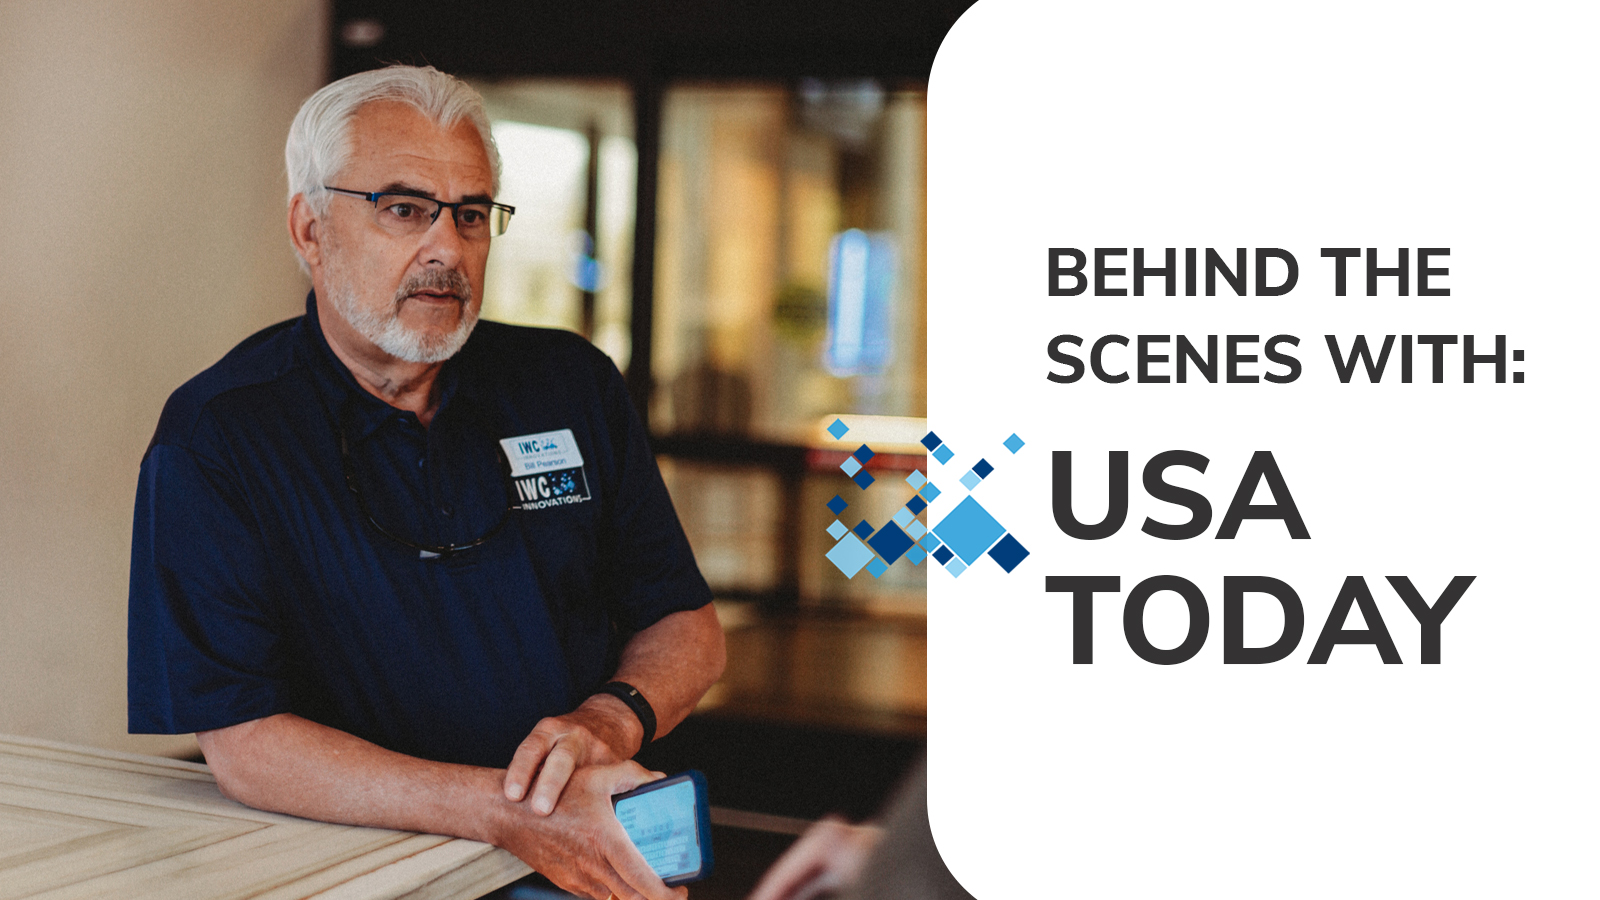 Behind the scenes with USA today